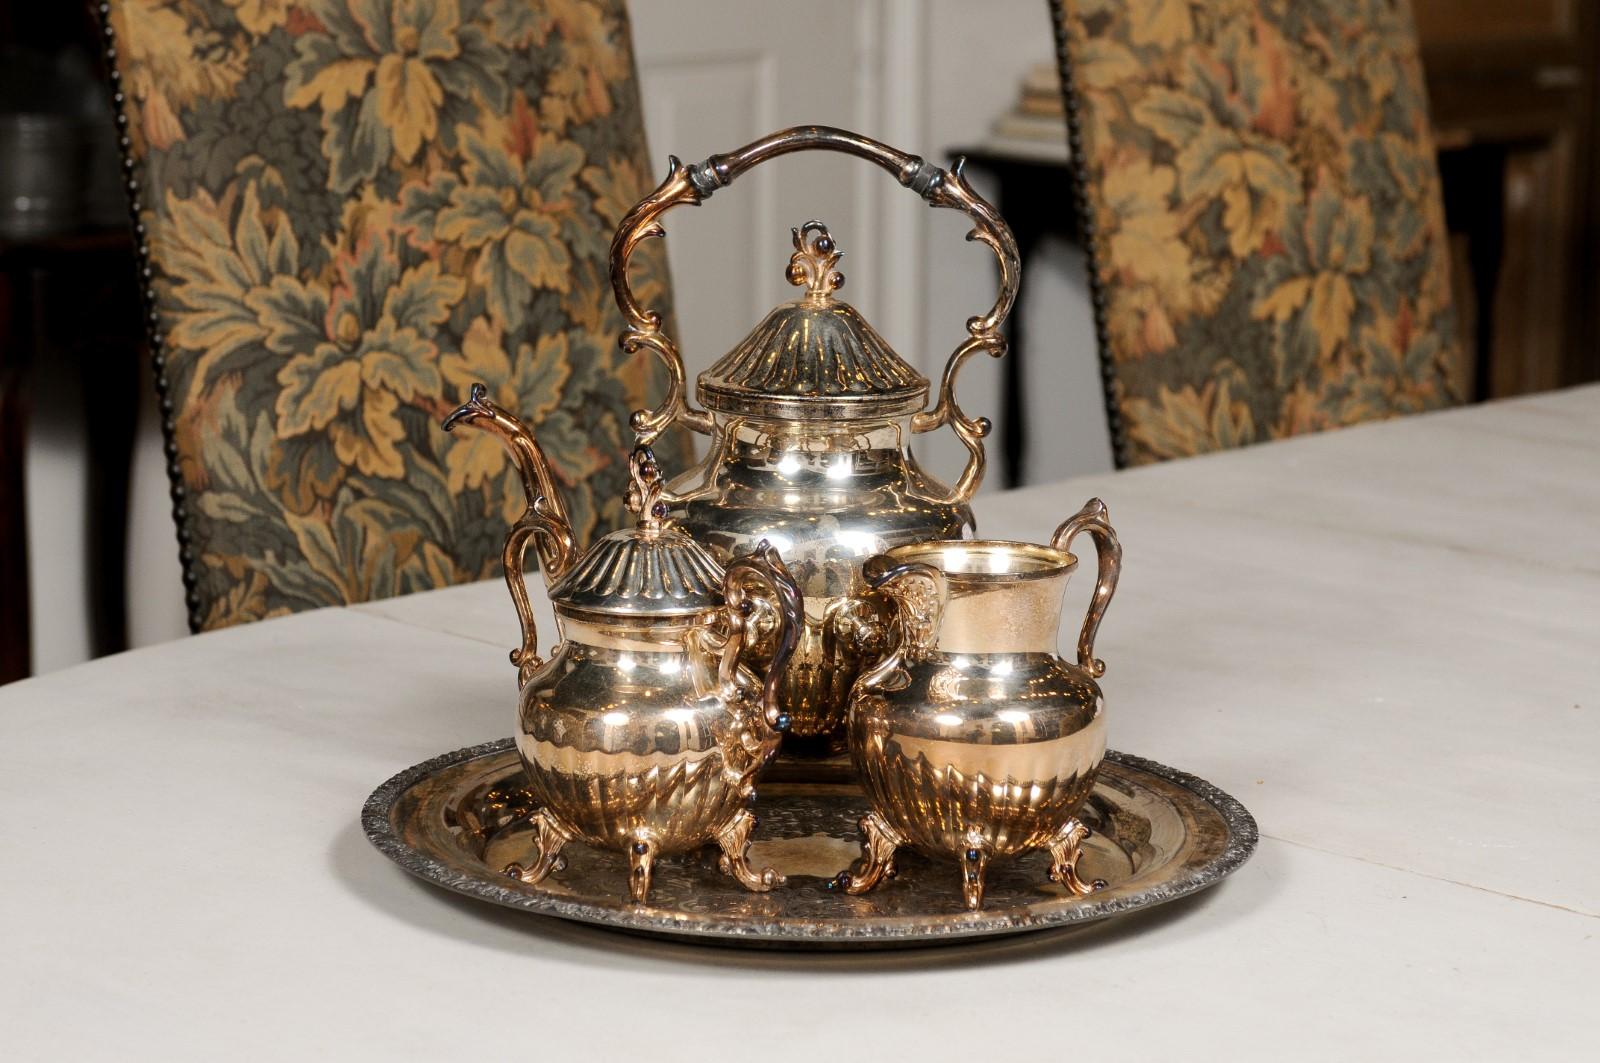 An American three-piece Birmingham Silver Company tea set from the mid 20th century, with scrolling accents. Created by the Birmingham Silver Company in the 1960s, this set features a teapot (10